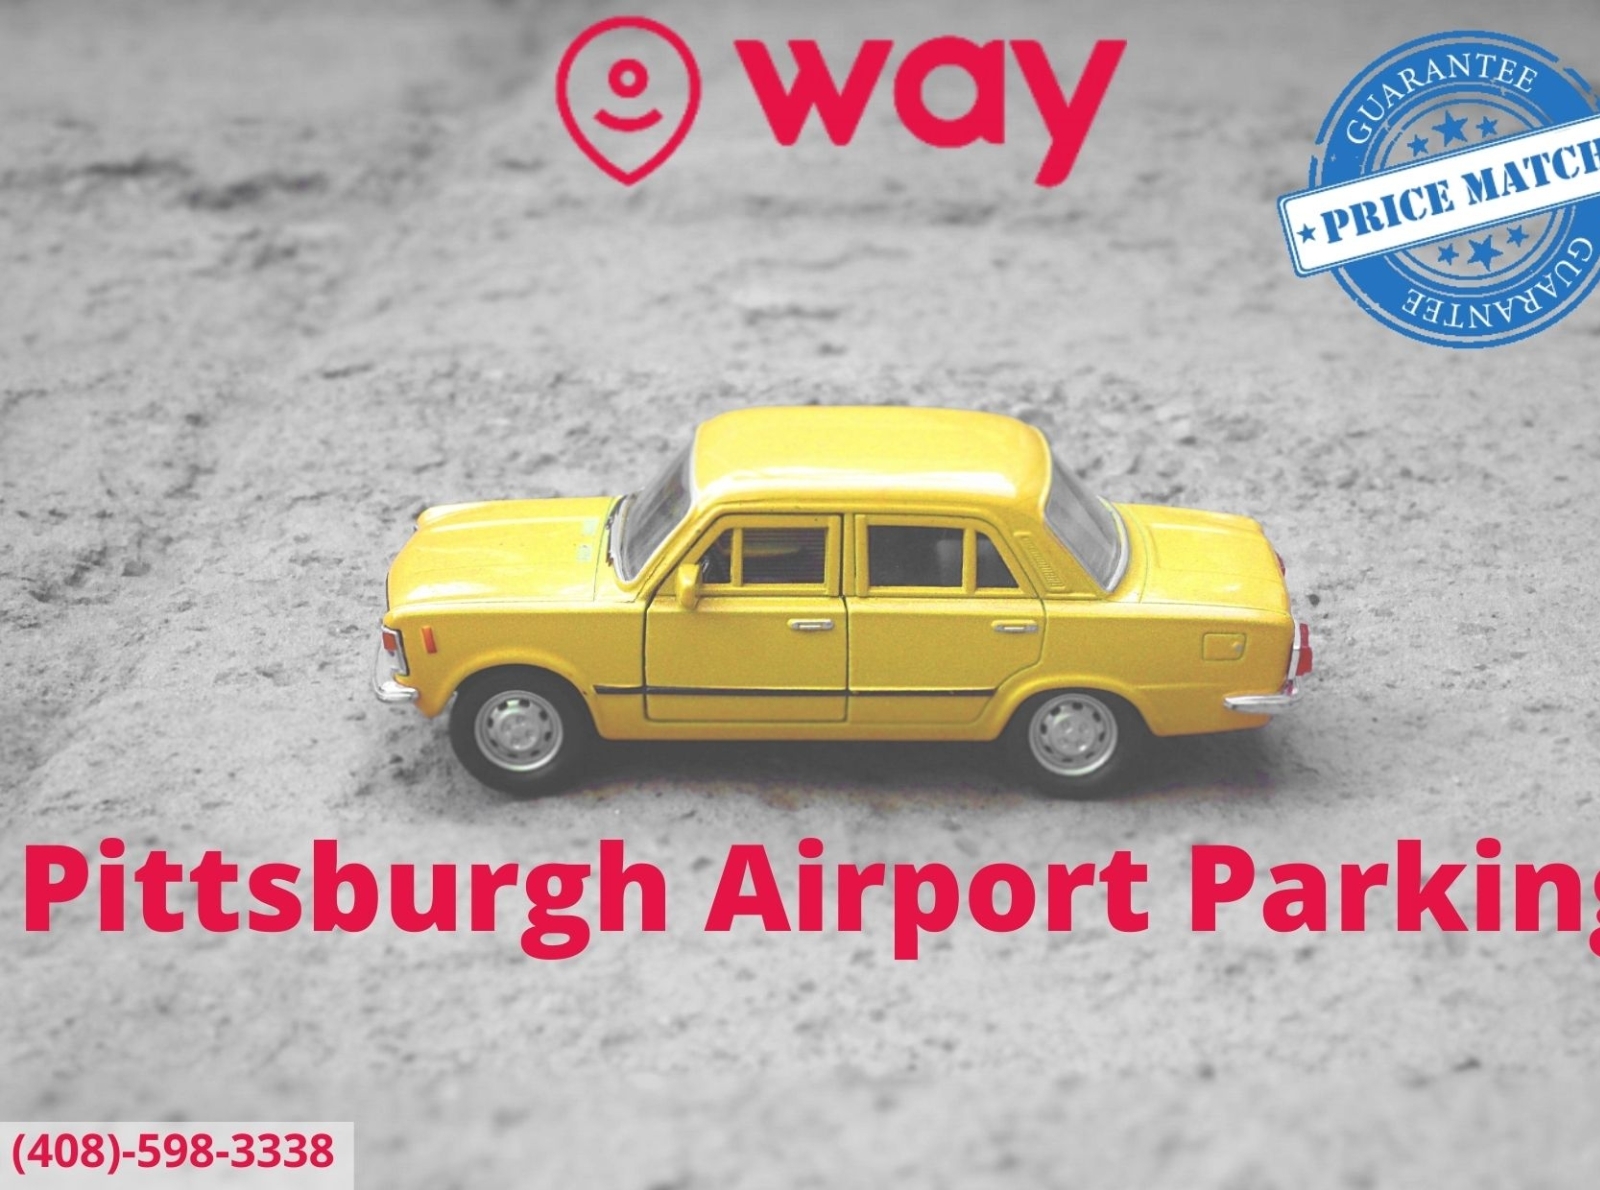 pittsburgh-airport-parking-by-way-on-dribbble